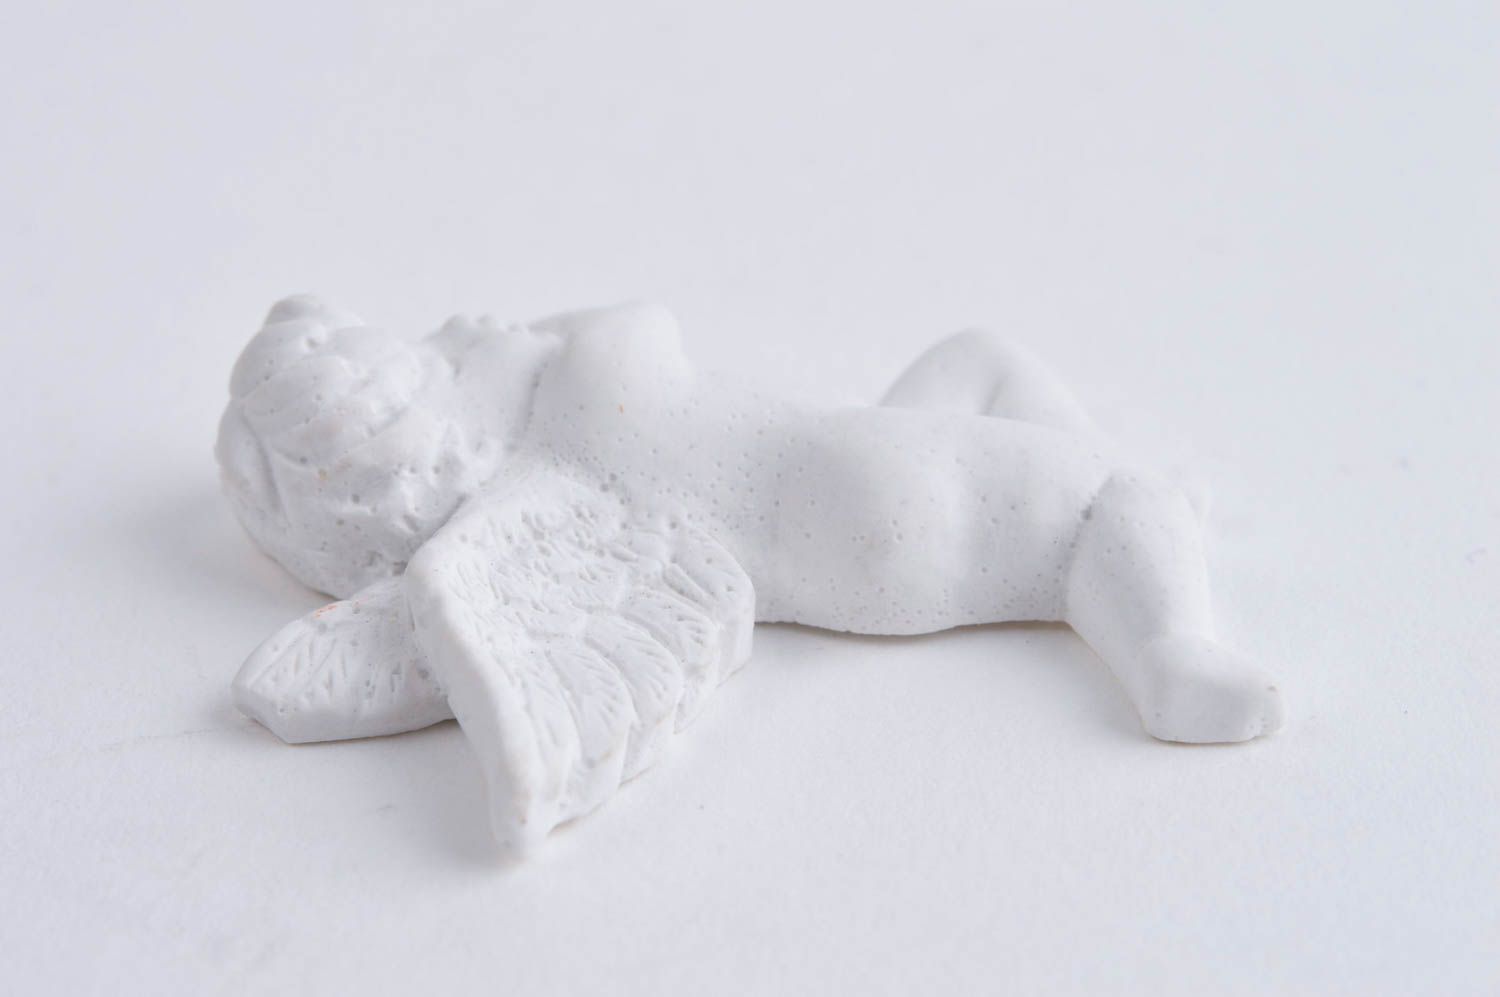 Handmade craft blank arts and crafts supply plaster figurine gift ideas for kids photo 4